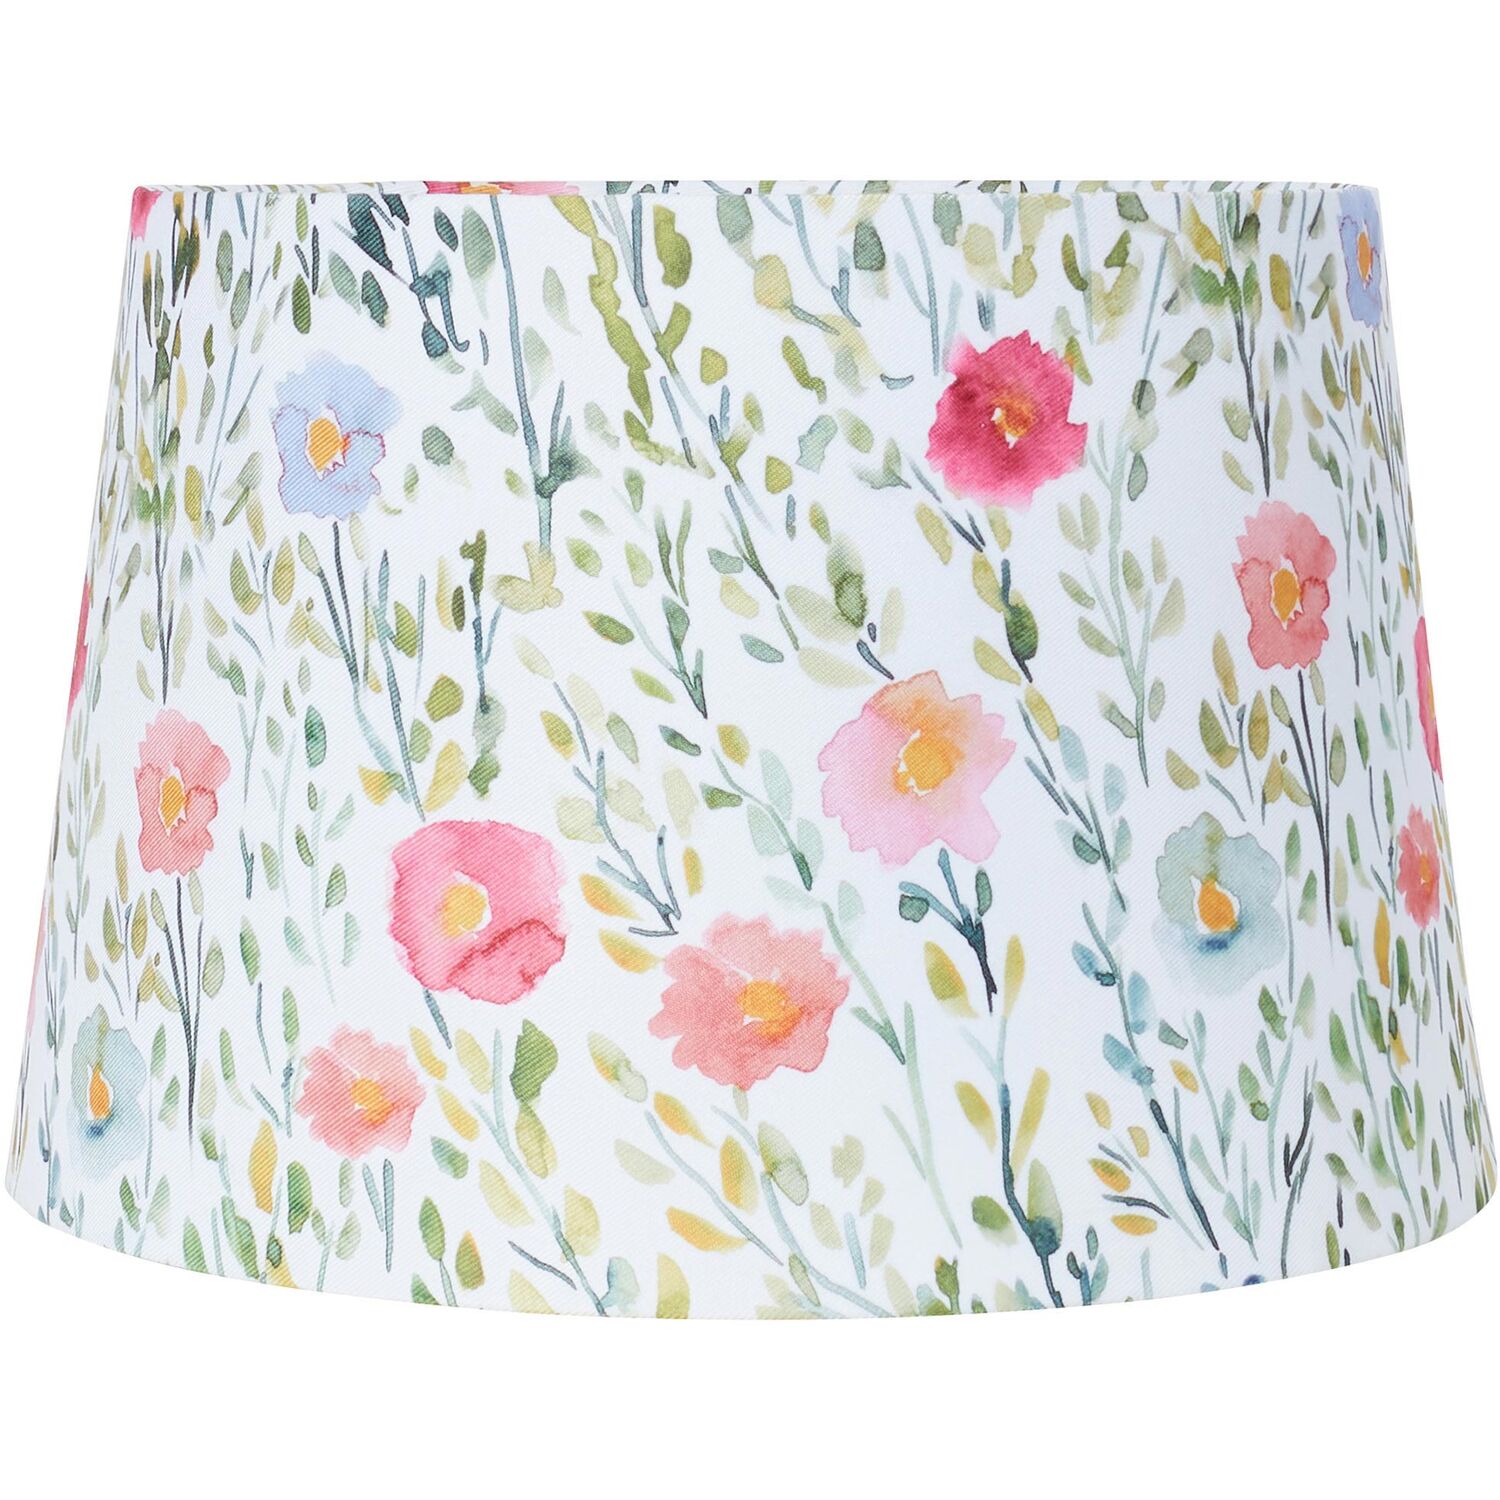 Pastel Floral Tapered Shade - White Image 1